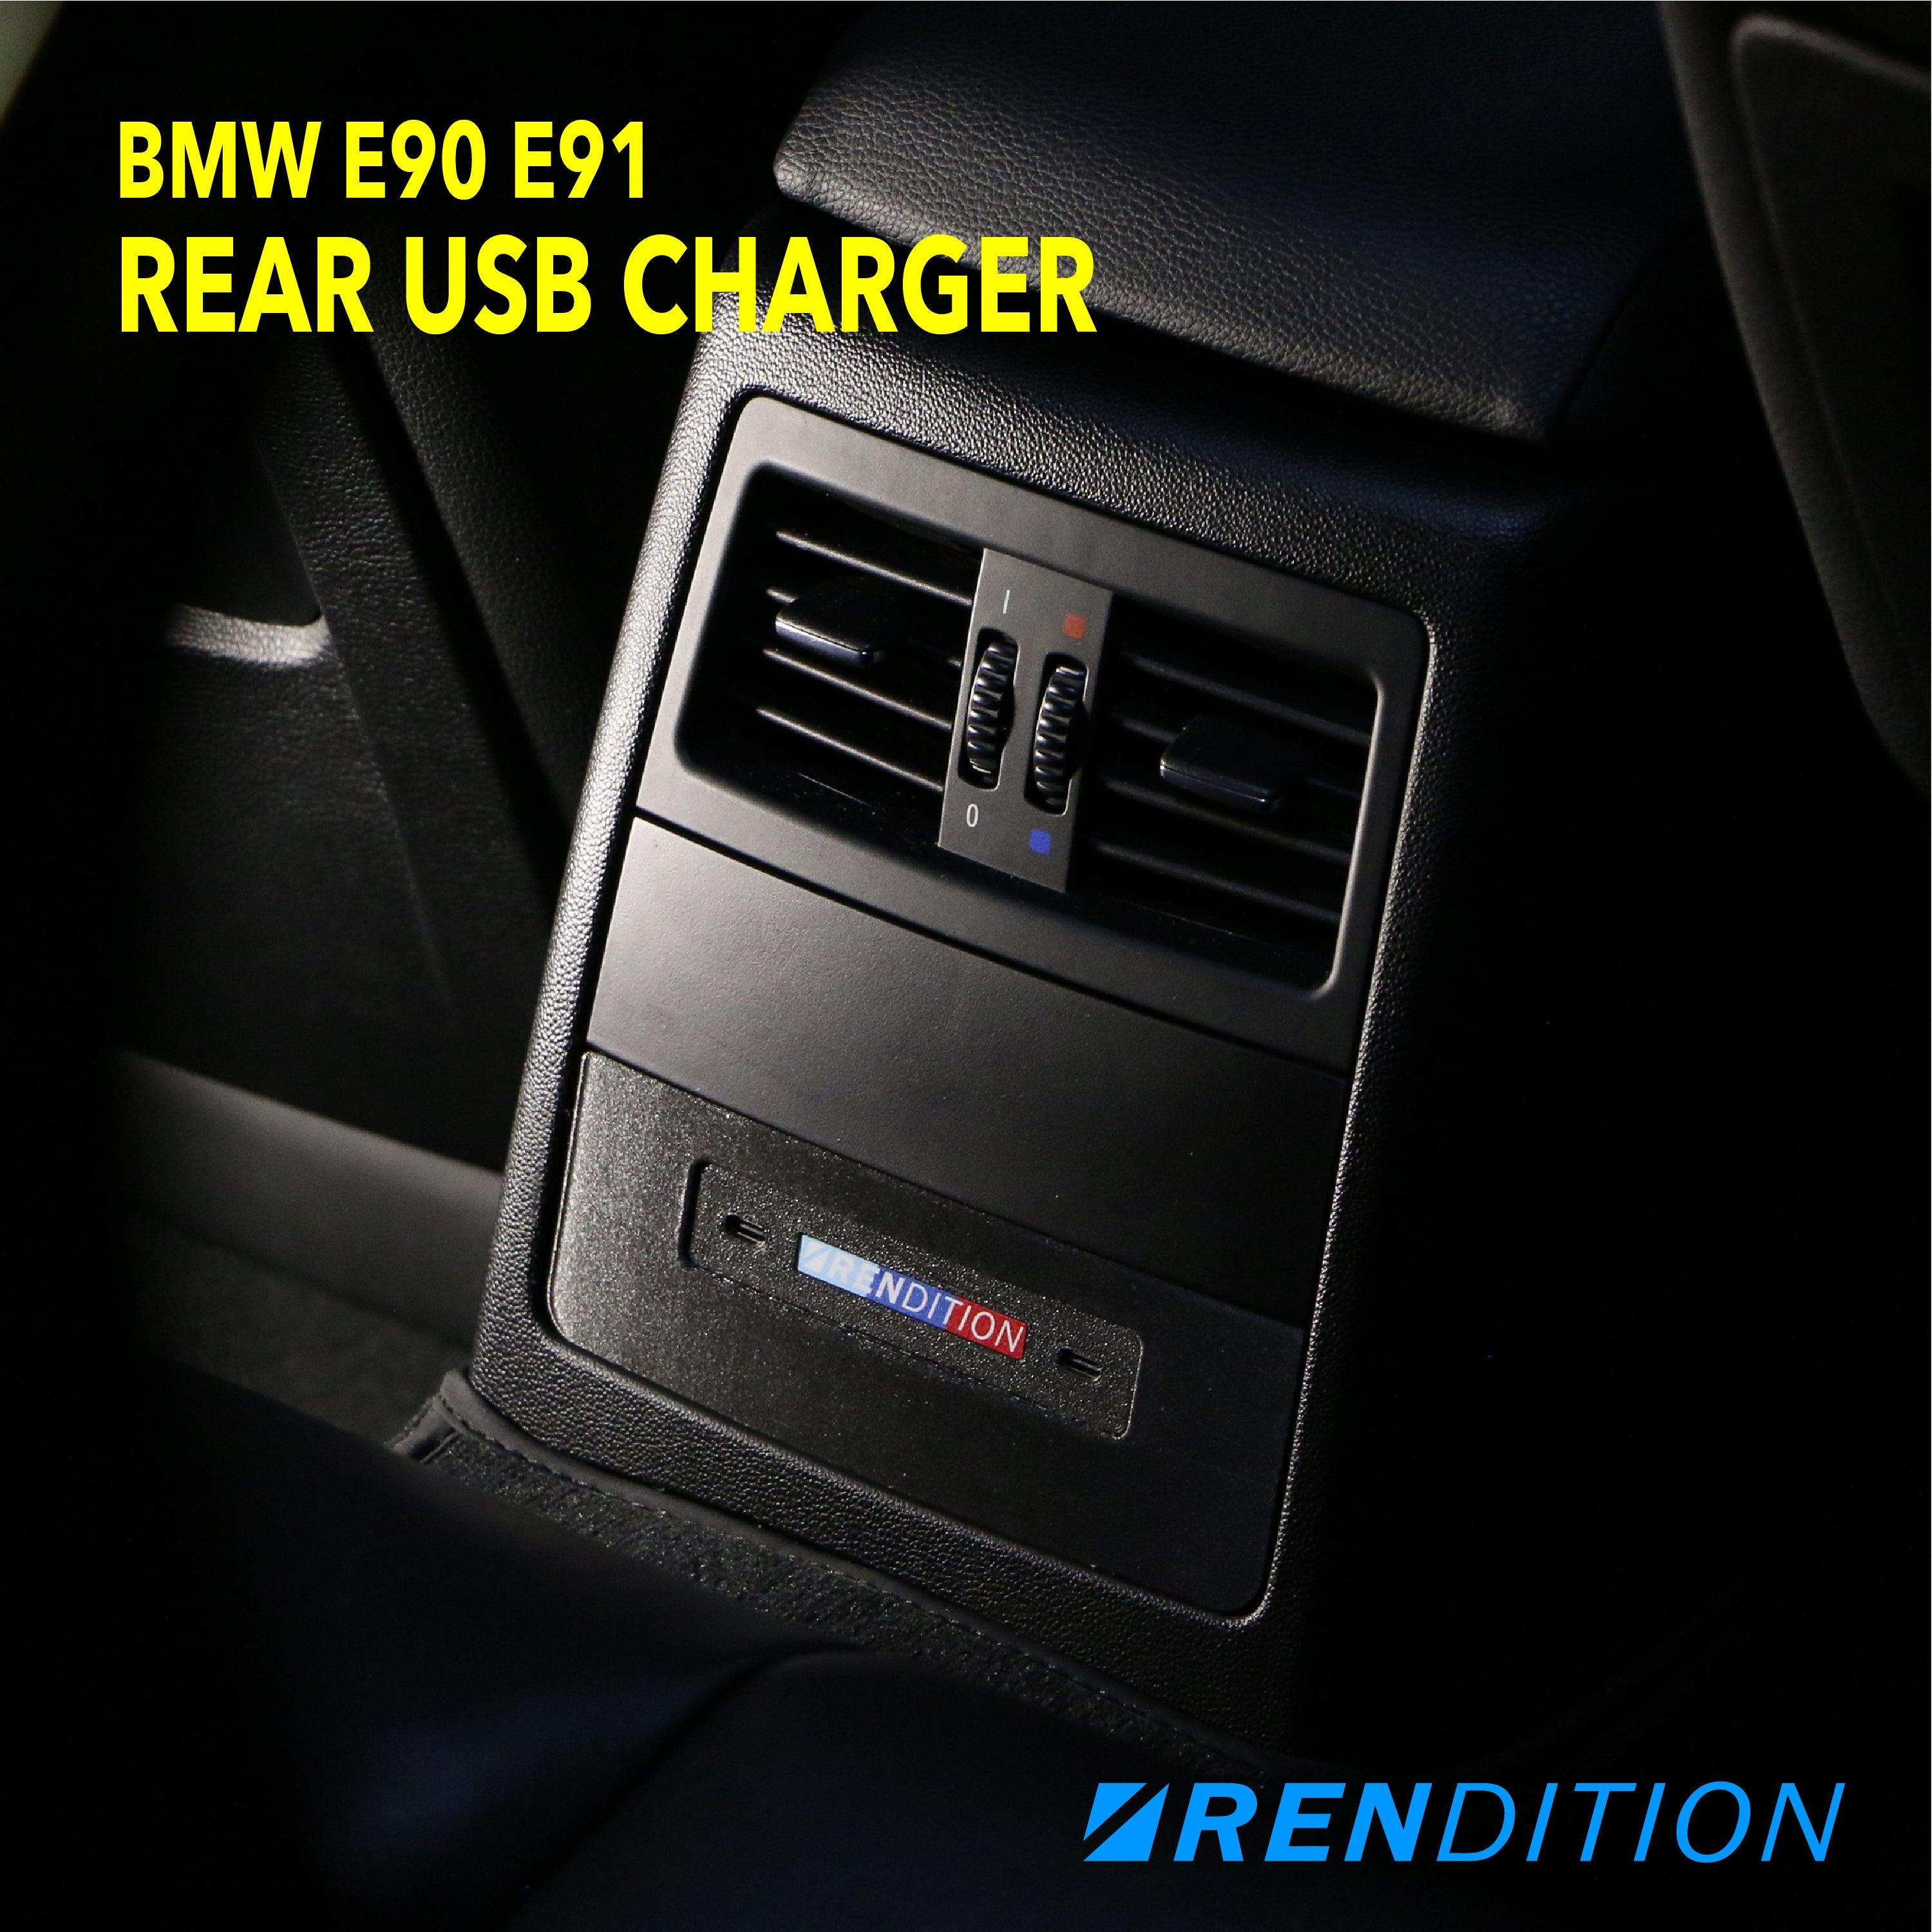 BMW E90 E91 REAR USB CHARGER - K2 Industries